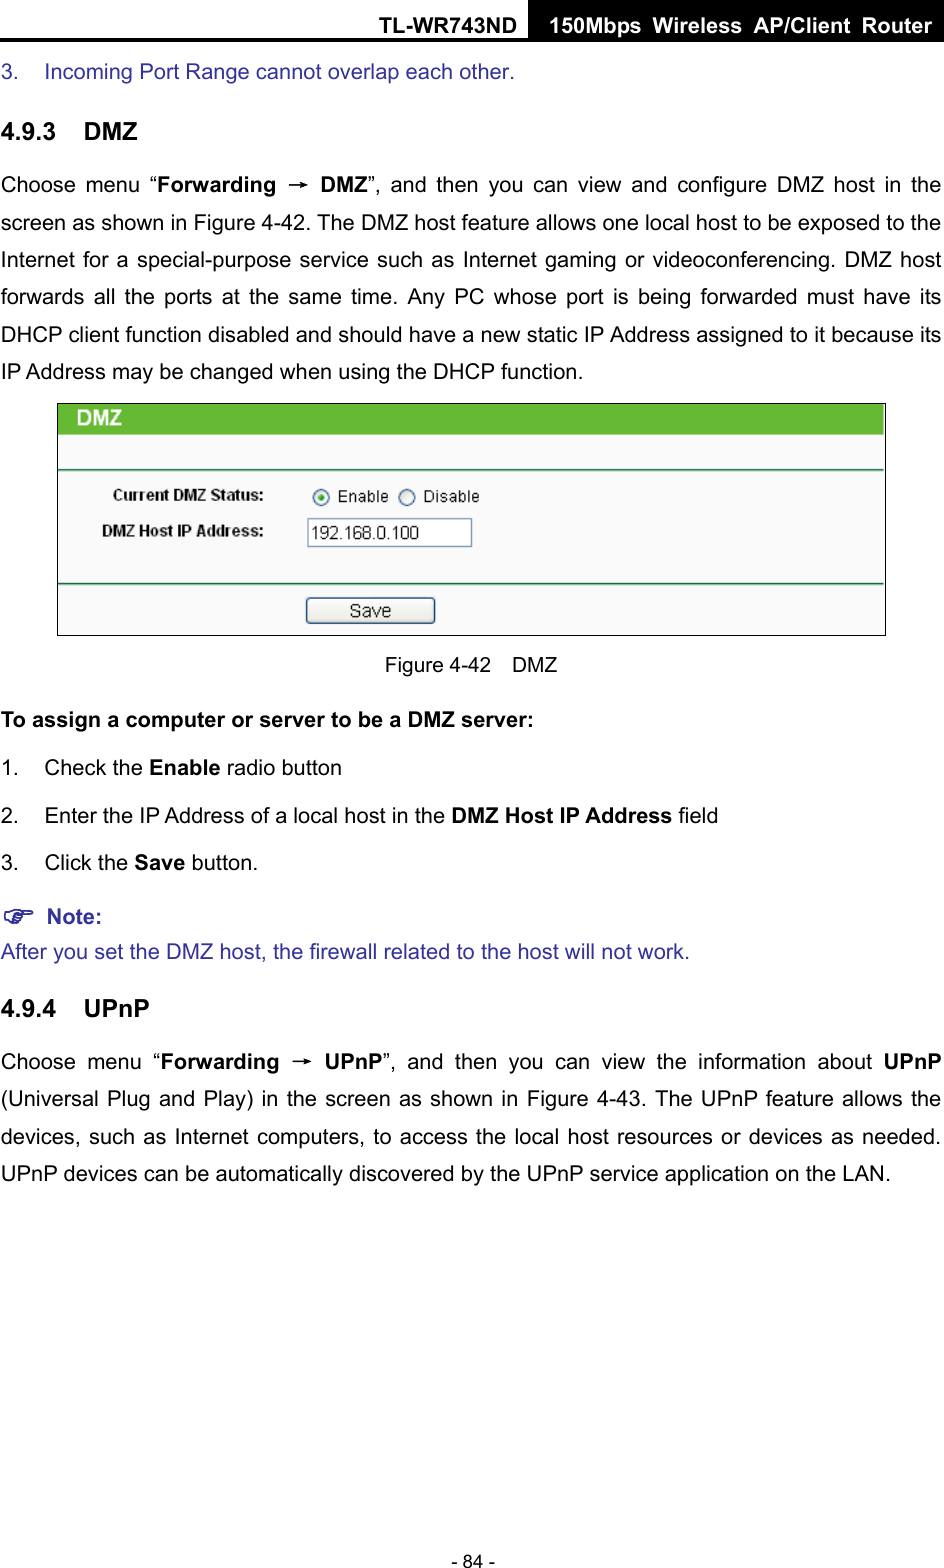 TL-WR743ND 150Mbps Wireless AP/Client Router - 84 - 3.  Incoming Port Range cannot overlap each other. 4.9.3  DMZ Choose menu “Forwarding  → DMZ”, and then you can view and configure DMZ host in the screen as shown in Figure 4-42. The DMZ host feature allows one local host to be exposed to the Internet for a special-purpose service such as Internet gaming or videoconferencing. DMZ host forwards all the ports at the same time. Any PC whose port is being forwarded must have its DHCP client function disabled and should have a new static IP Address assigned to it because its IP Address may be changed when using the DHCP function.  Figure 4-42  DMZ To assign a computer or server to be a DMZ server:   1. Check the Enable radio button 2.  Enter the IP Address of a local host in the DMZ Host IP Address field 3. Click the Save button.  Note:  After you set the DMZ host, the firewall related to the host will not work. 4.9.4  UPnP Choose menu “Forwarding  → UPnP”, and then you can view the information about UPnP (Universal Plug and Play) in the screen as shown in Figure 4-43. The UPnP feature allows the devices, such as Internet computers, to access the local host resources or devices as needed. UPnP devices can be automatically discovered by the UPnP service application on the LAN. 